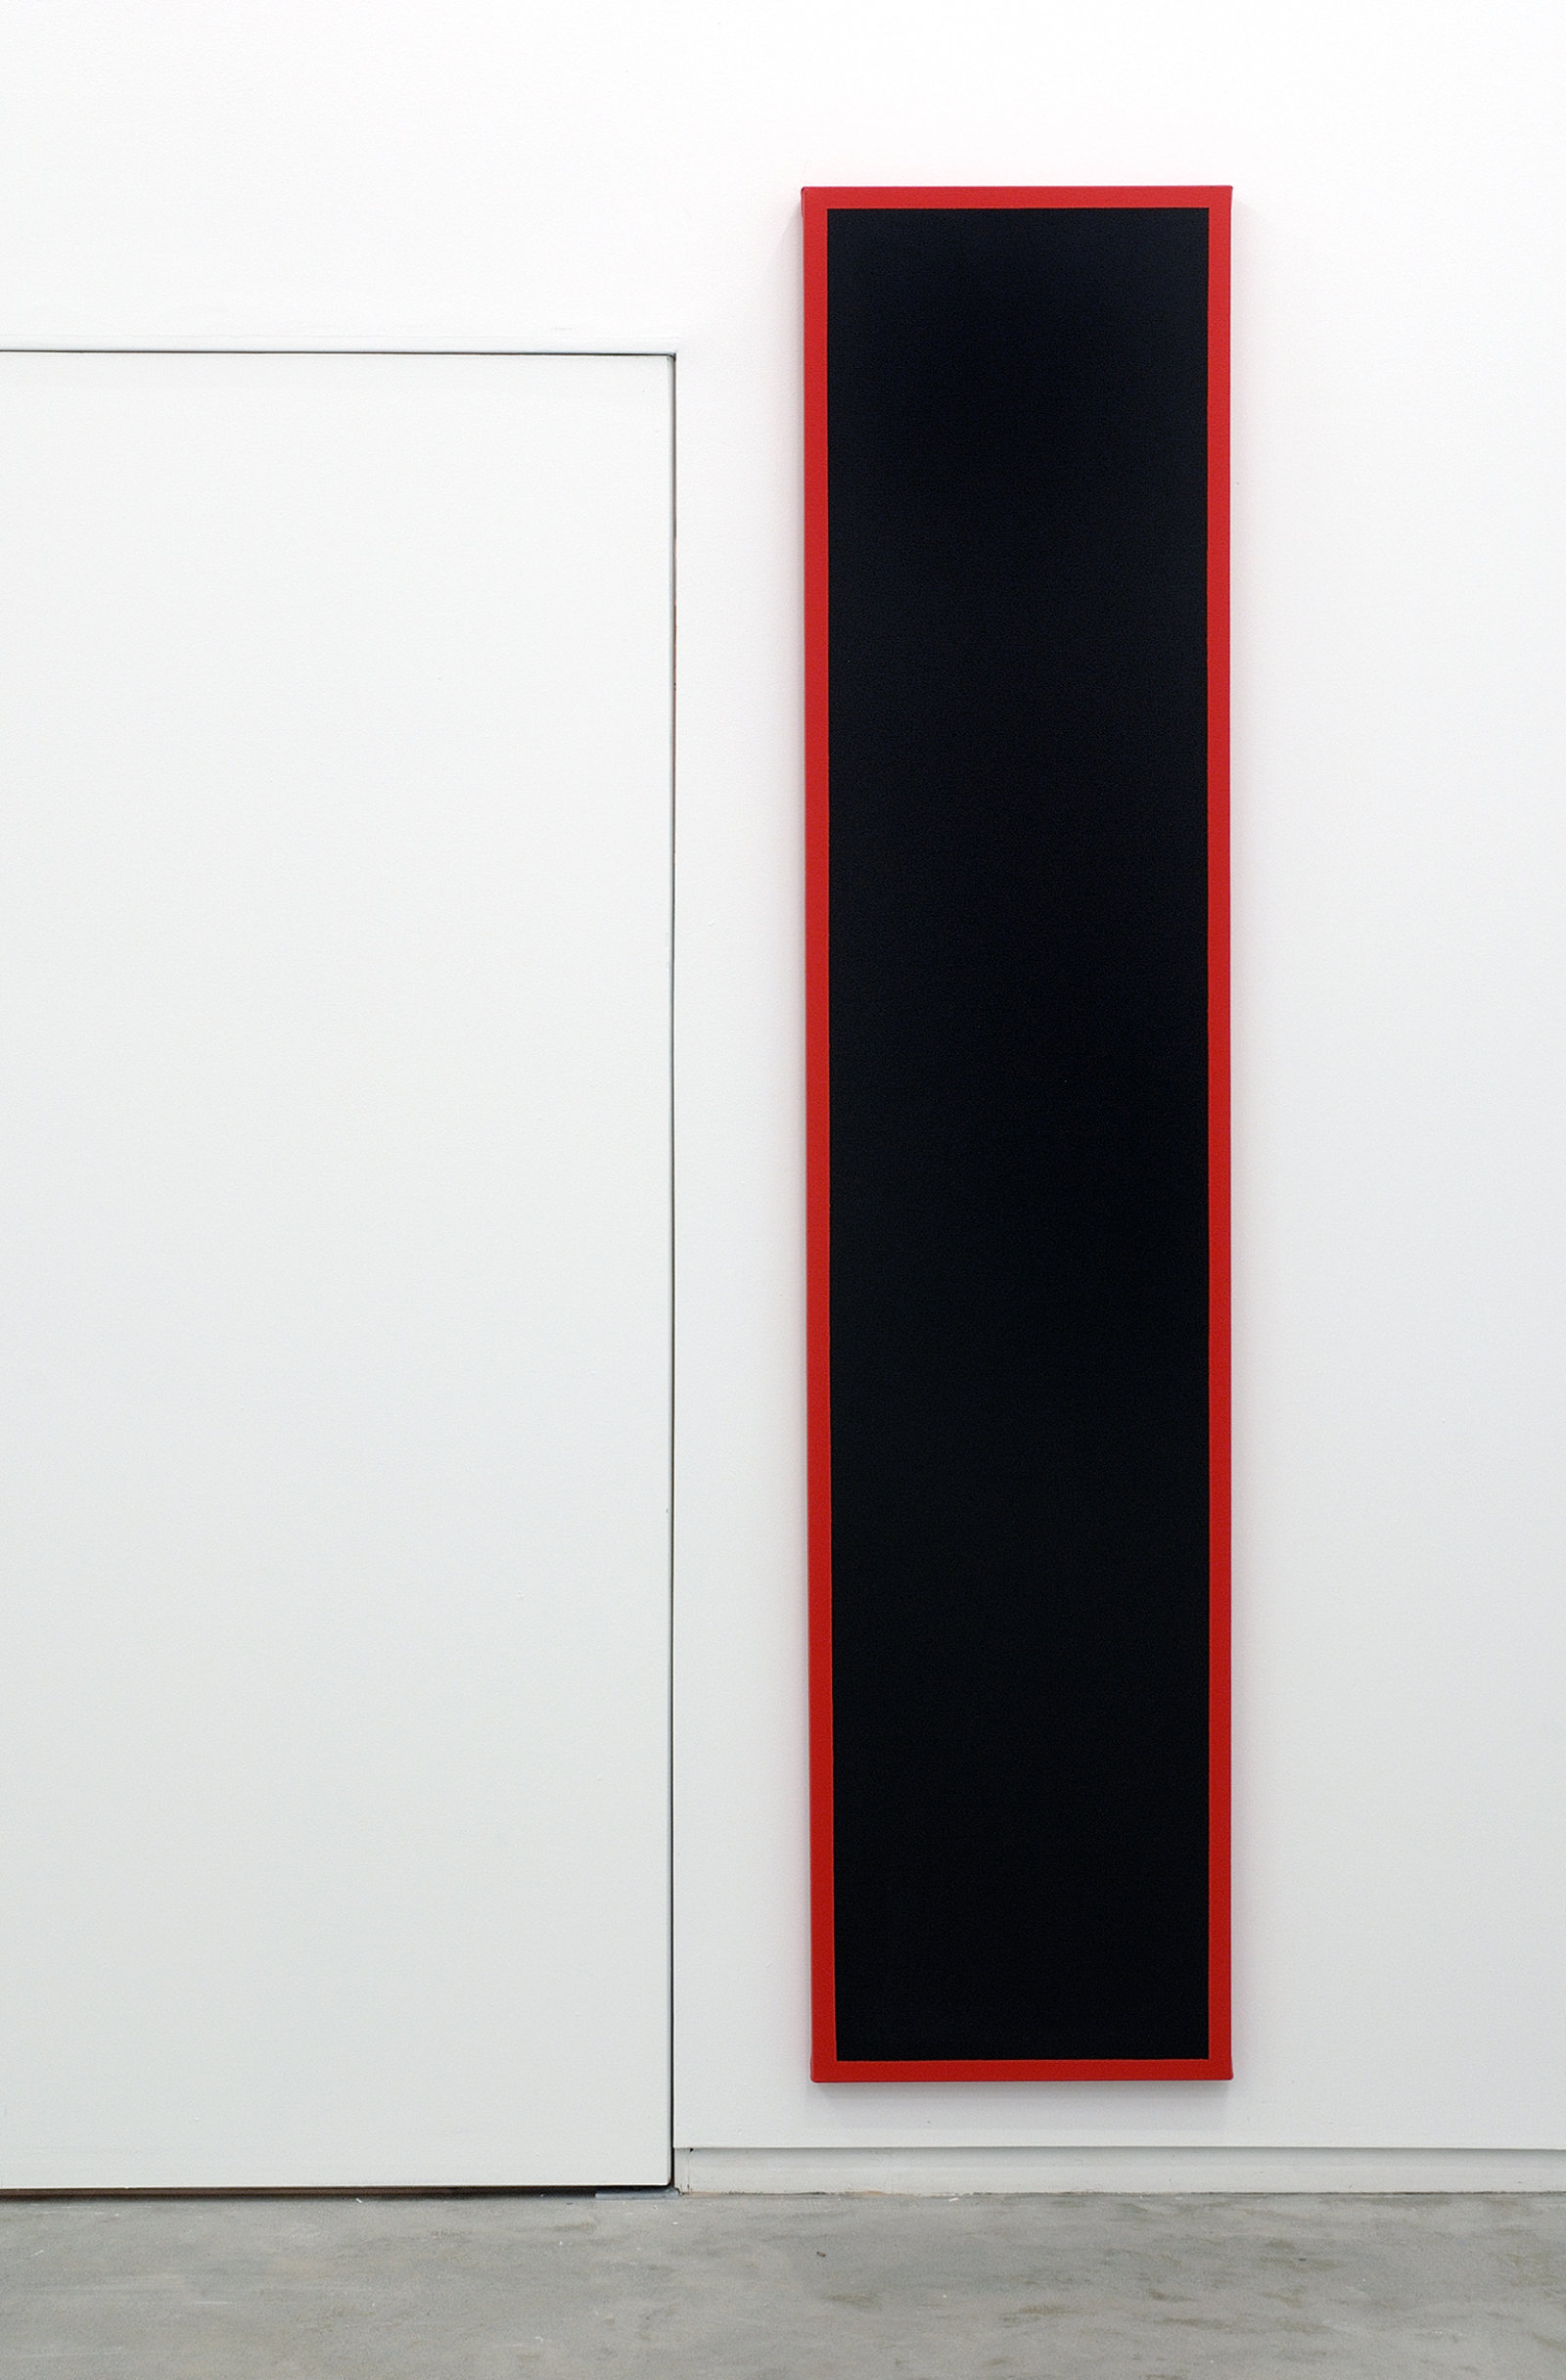 Ian Wallace, Untitled (Black Monochrome with Red), 1967–2007, acrylic on canvas, 90 x 20 in. (229 x 51 cm)